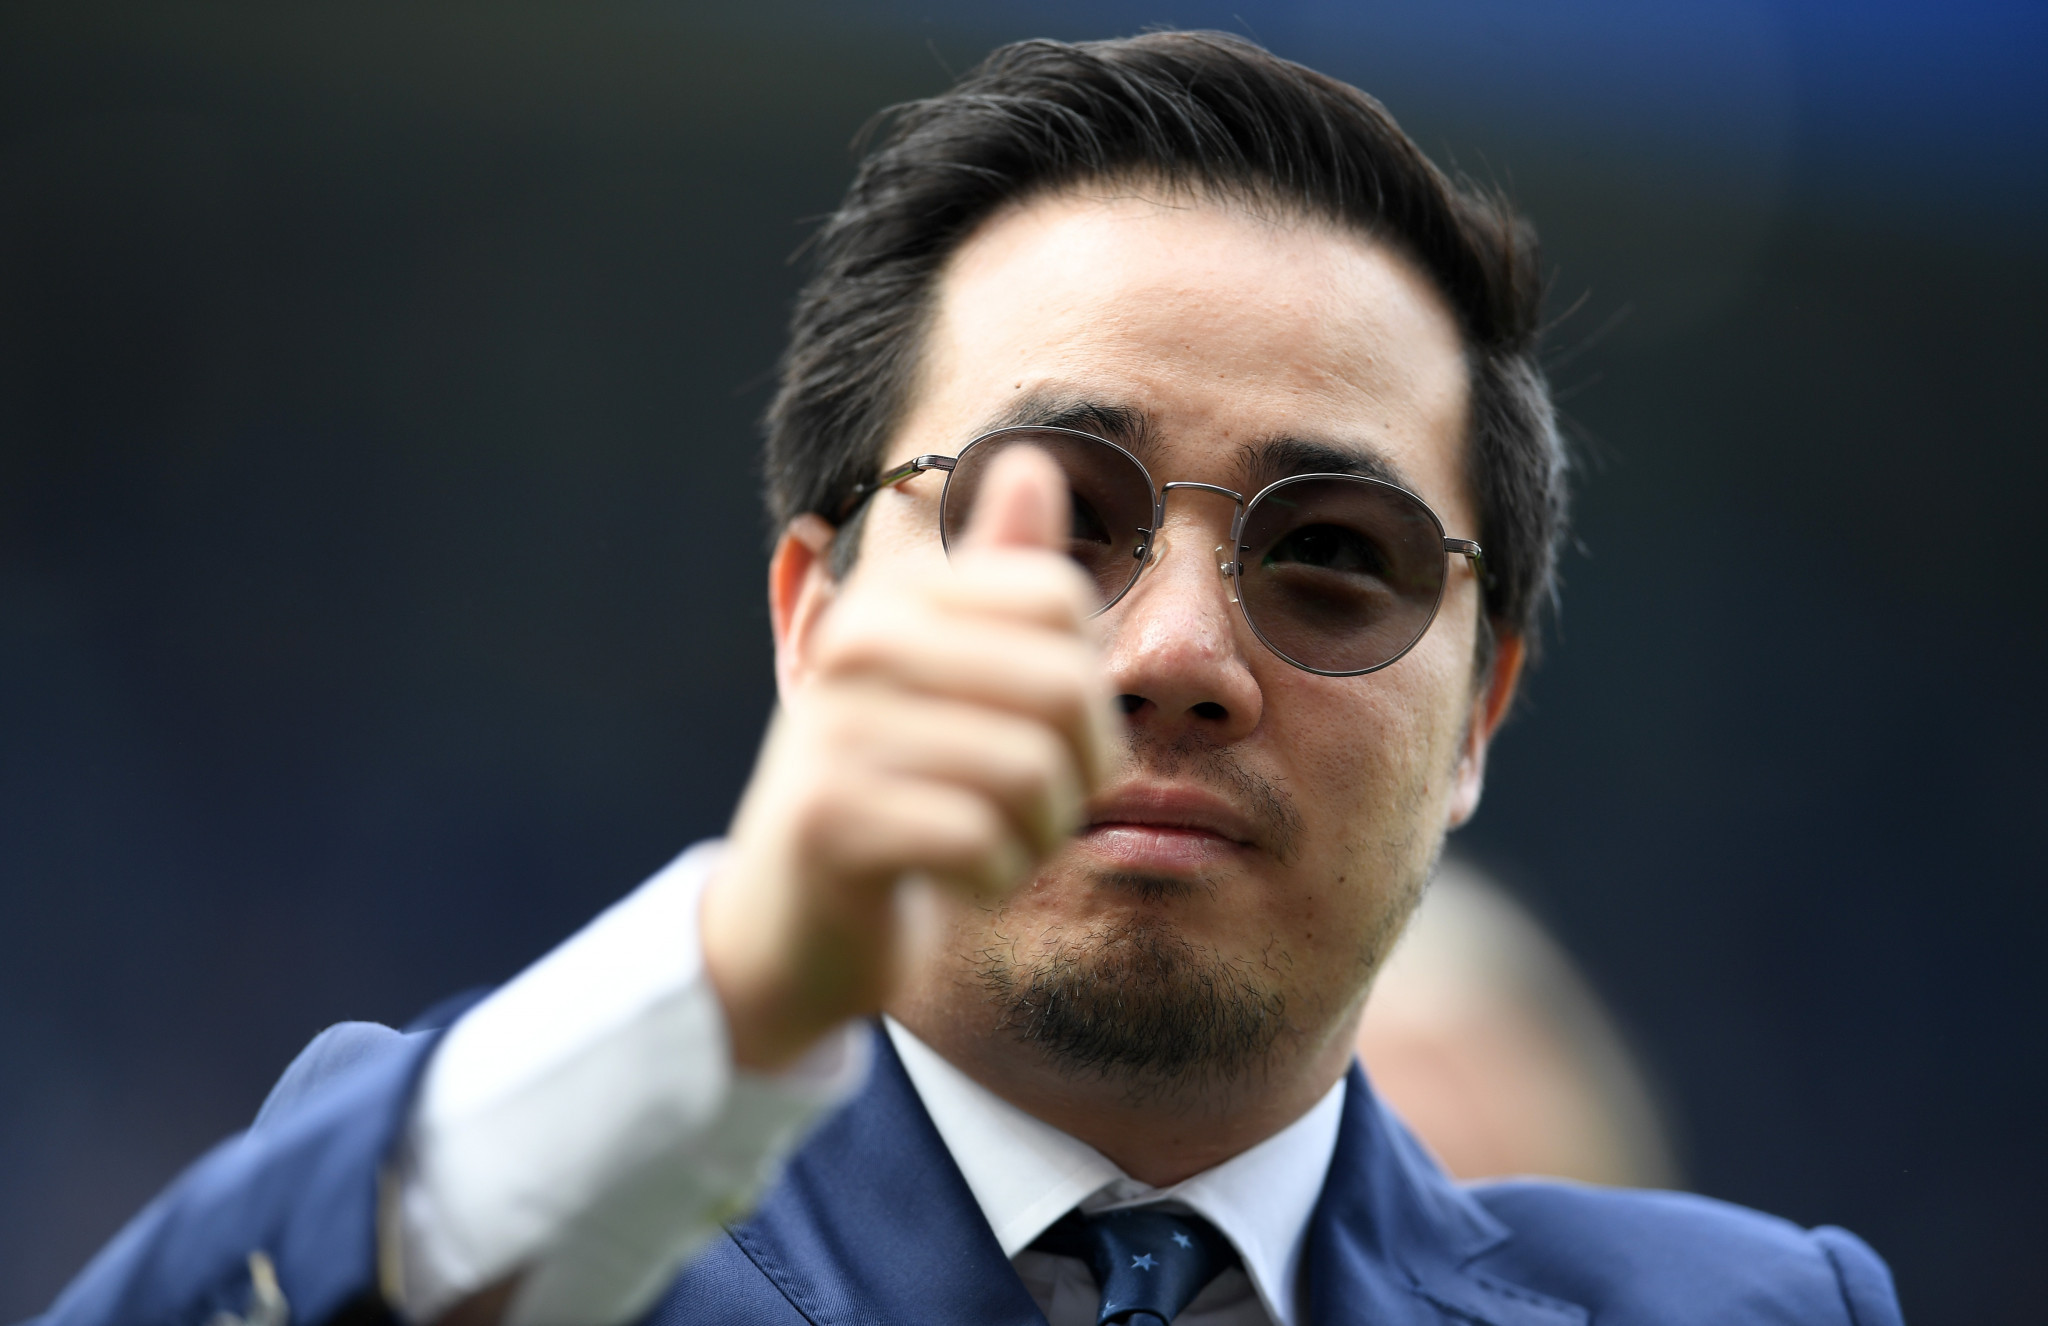 King Power chief executive Aiyawatt Srivaddhanaprabha claimed their support strengthens the company's relationship with Leicester, where they already own the Premier League football club ©Getty Images